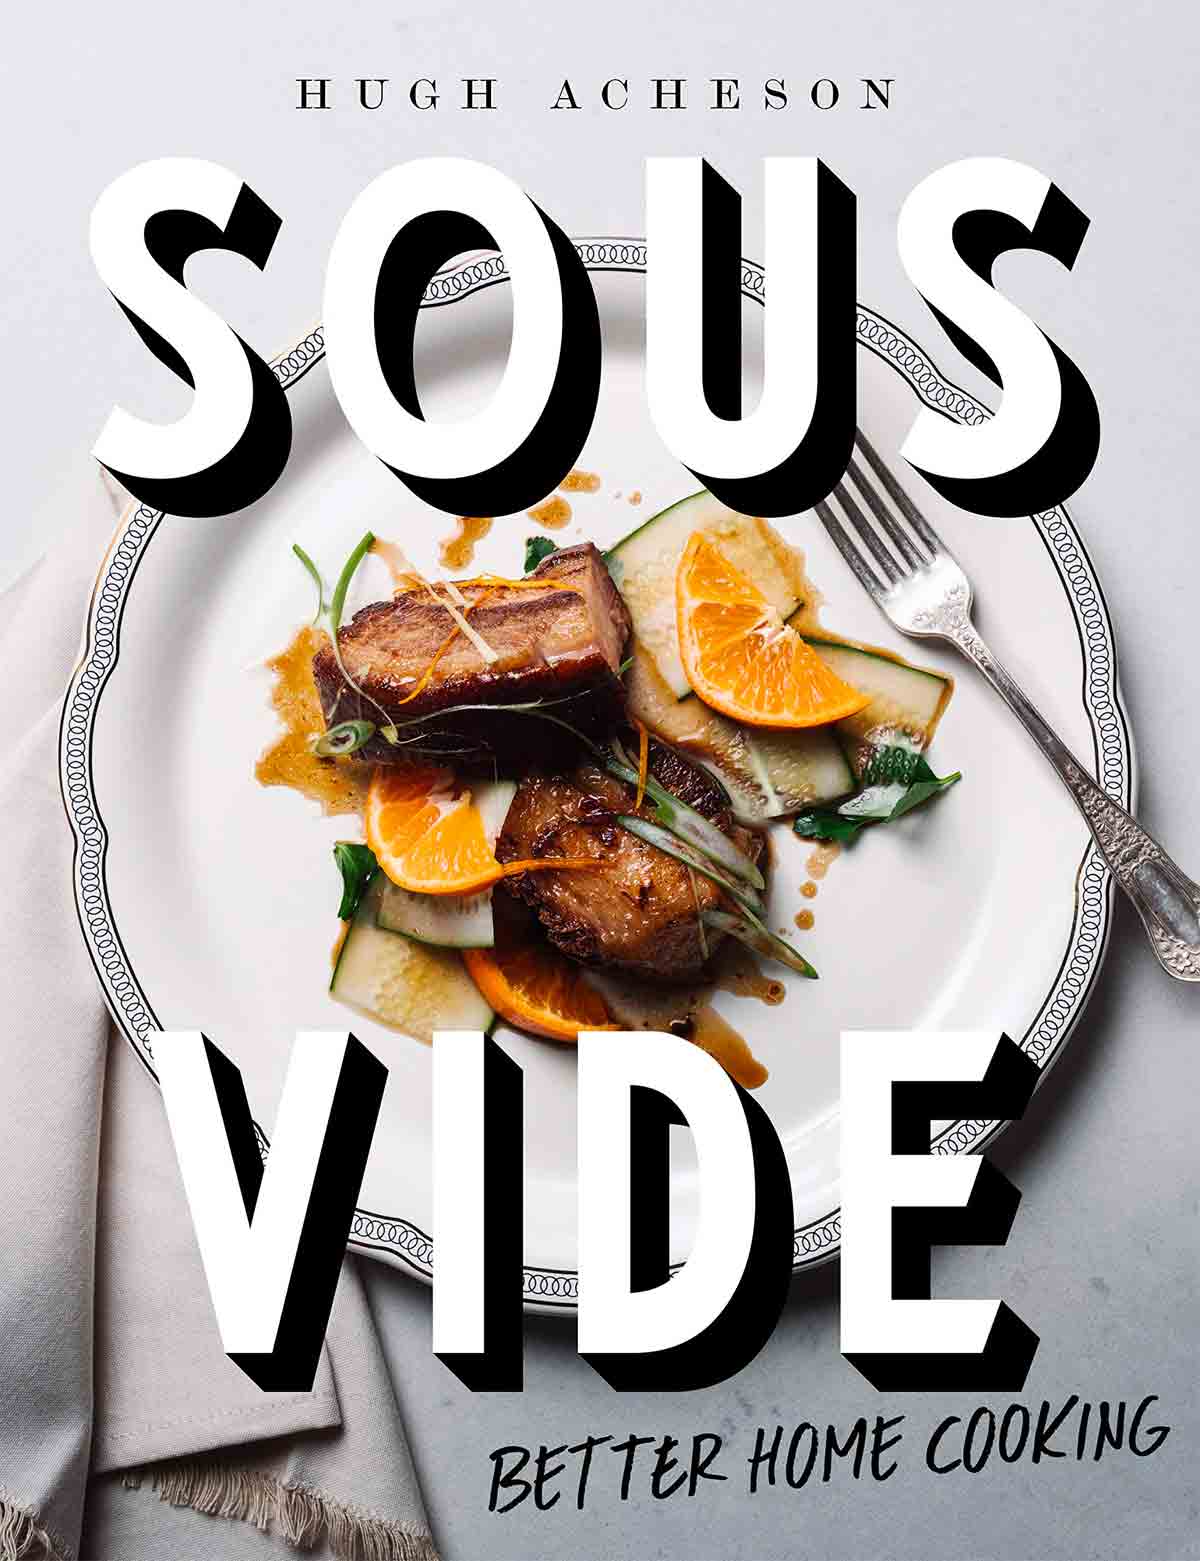 An image of the book cover of Sous Vide Better Home Cooking by Hugh Acheson.